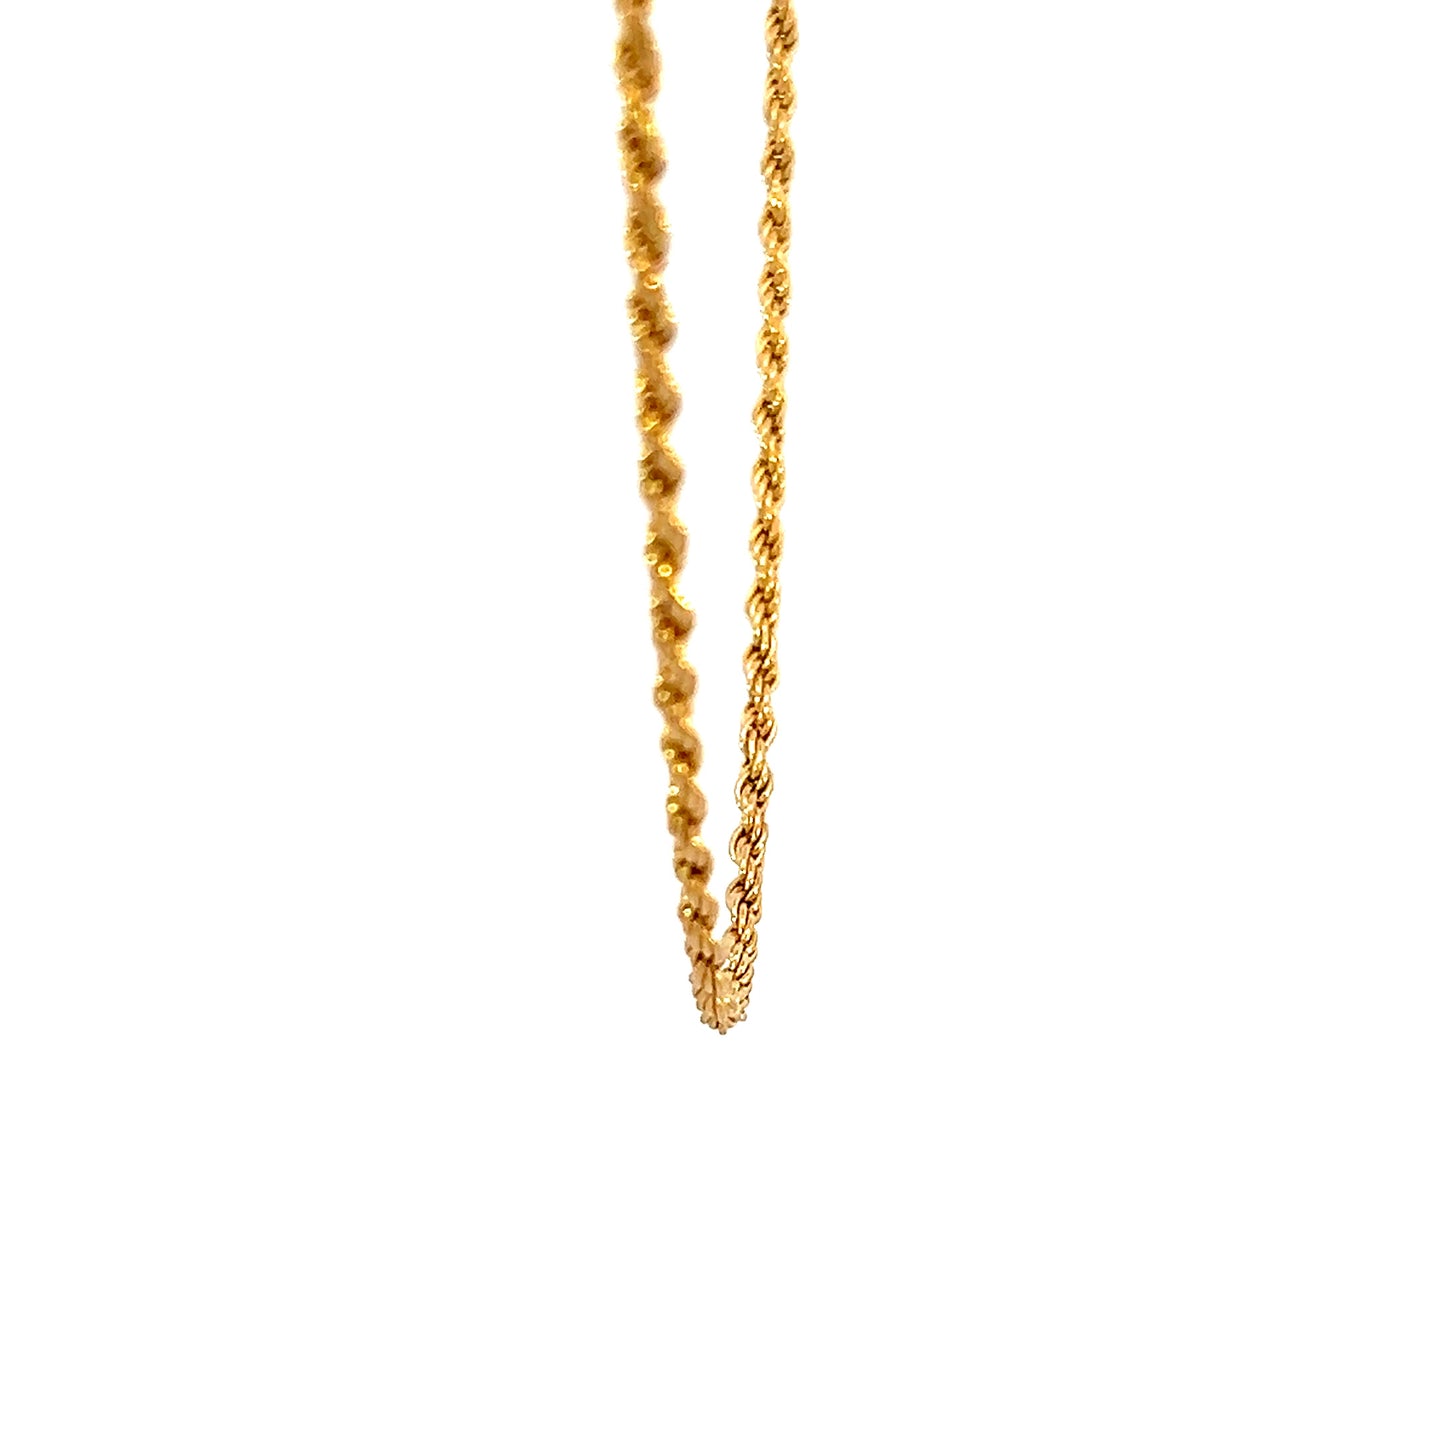 20" Solid Rope Chain - Layering - Minimal - 14k - Yellow Gold - 7.66g